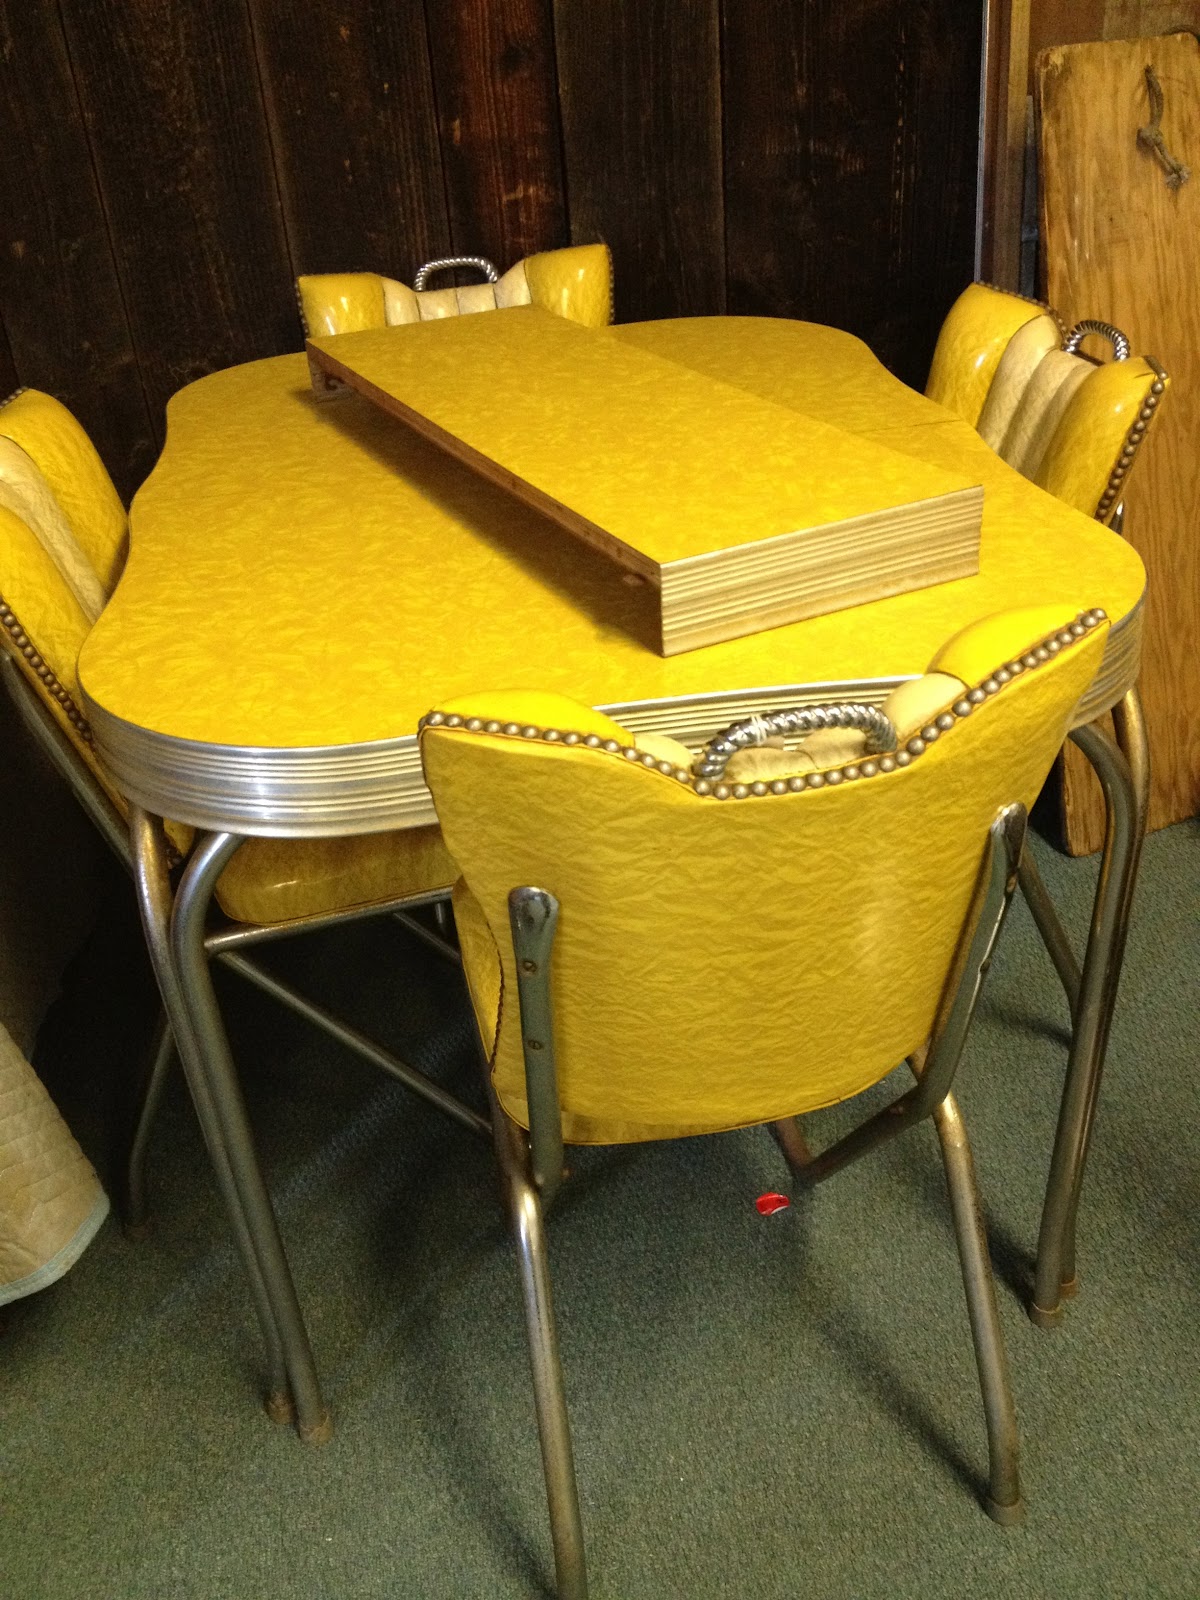 Vintage kitchen table and chairs | Hawk Haven